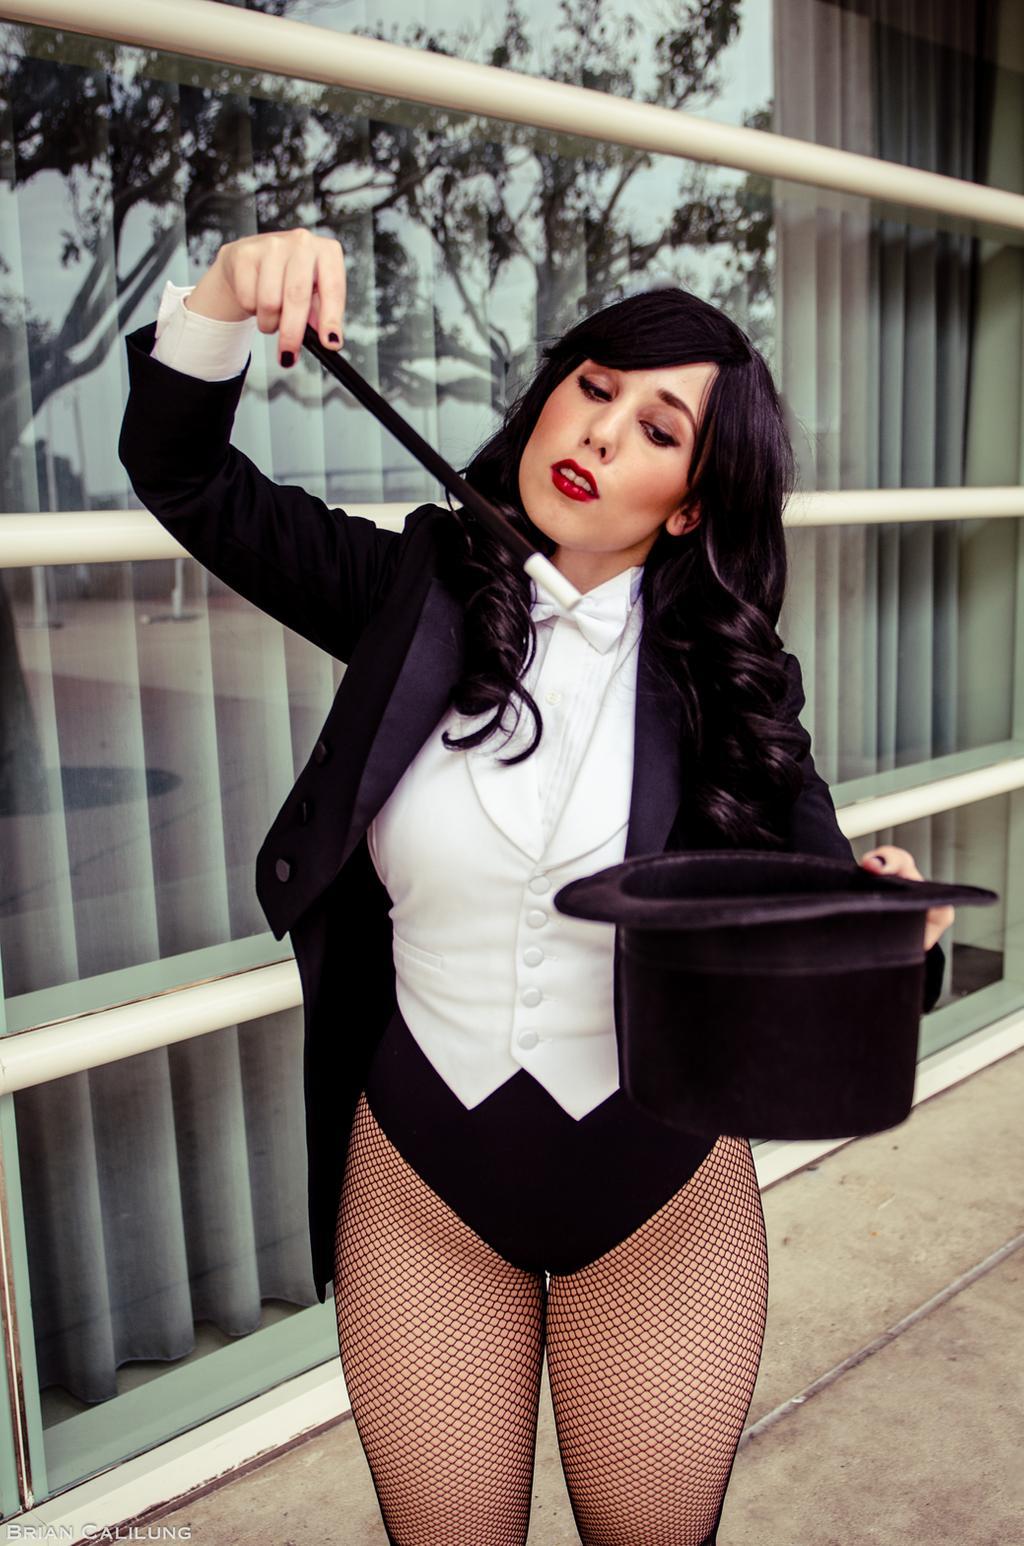 Hot Pictures Of Zatanna The Beautiful Magician And Batmans Love Interest The Viraler